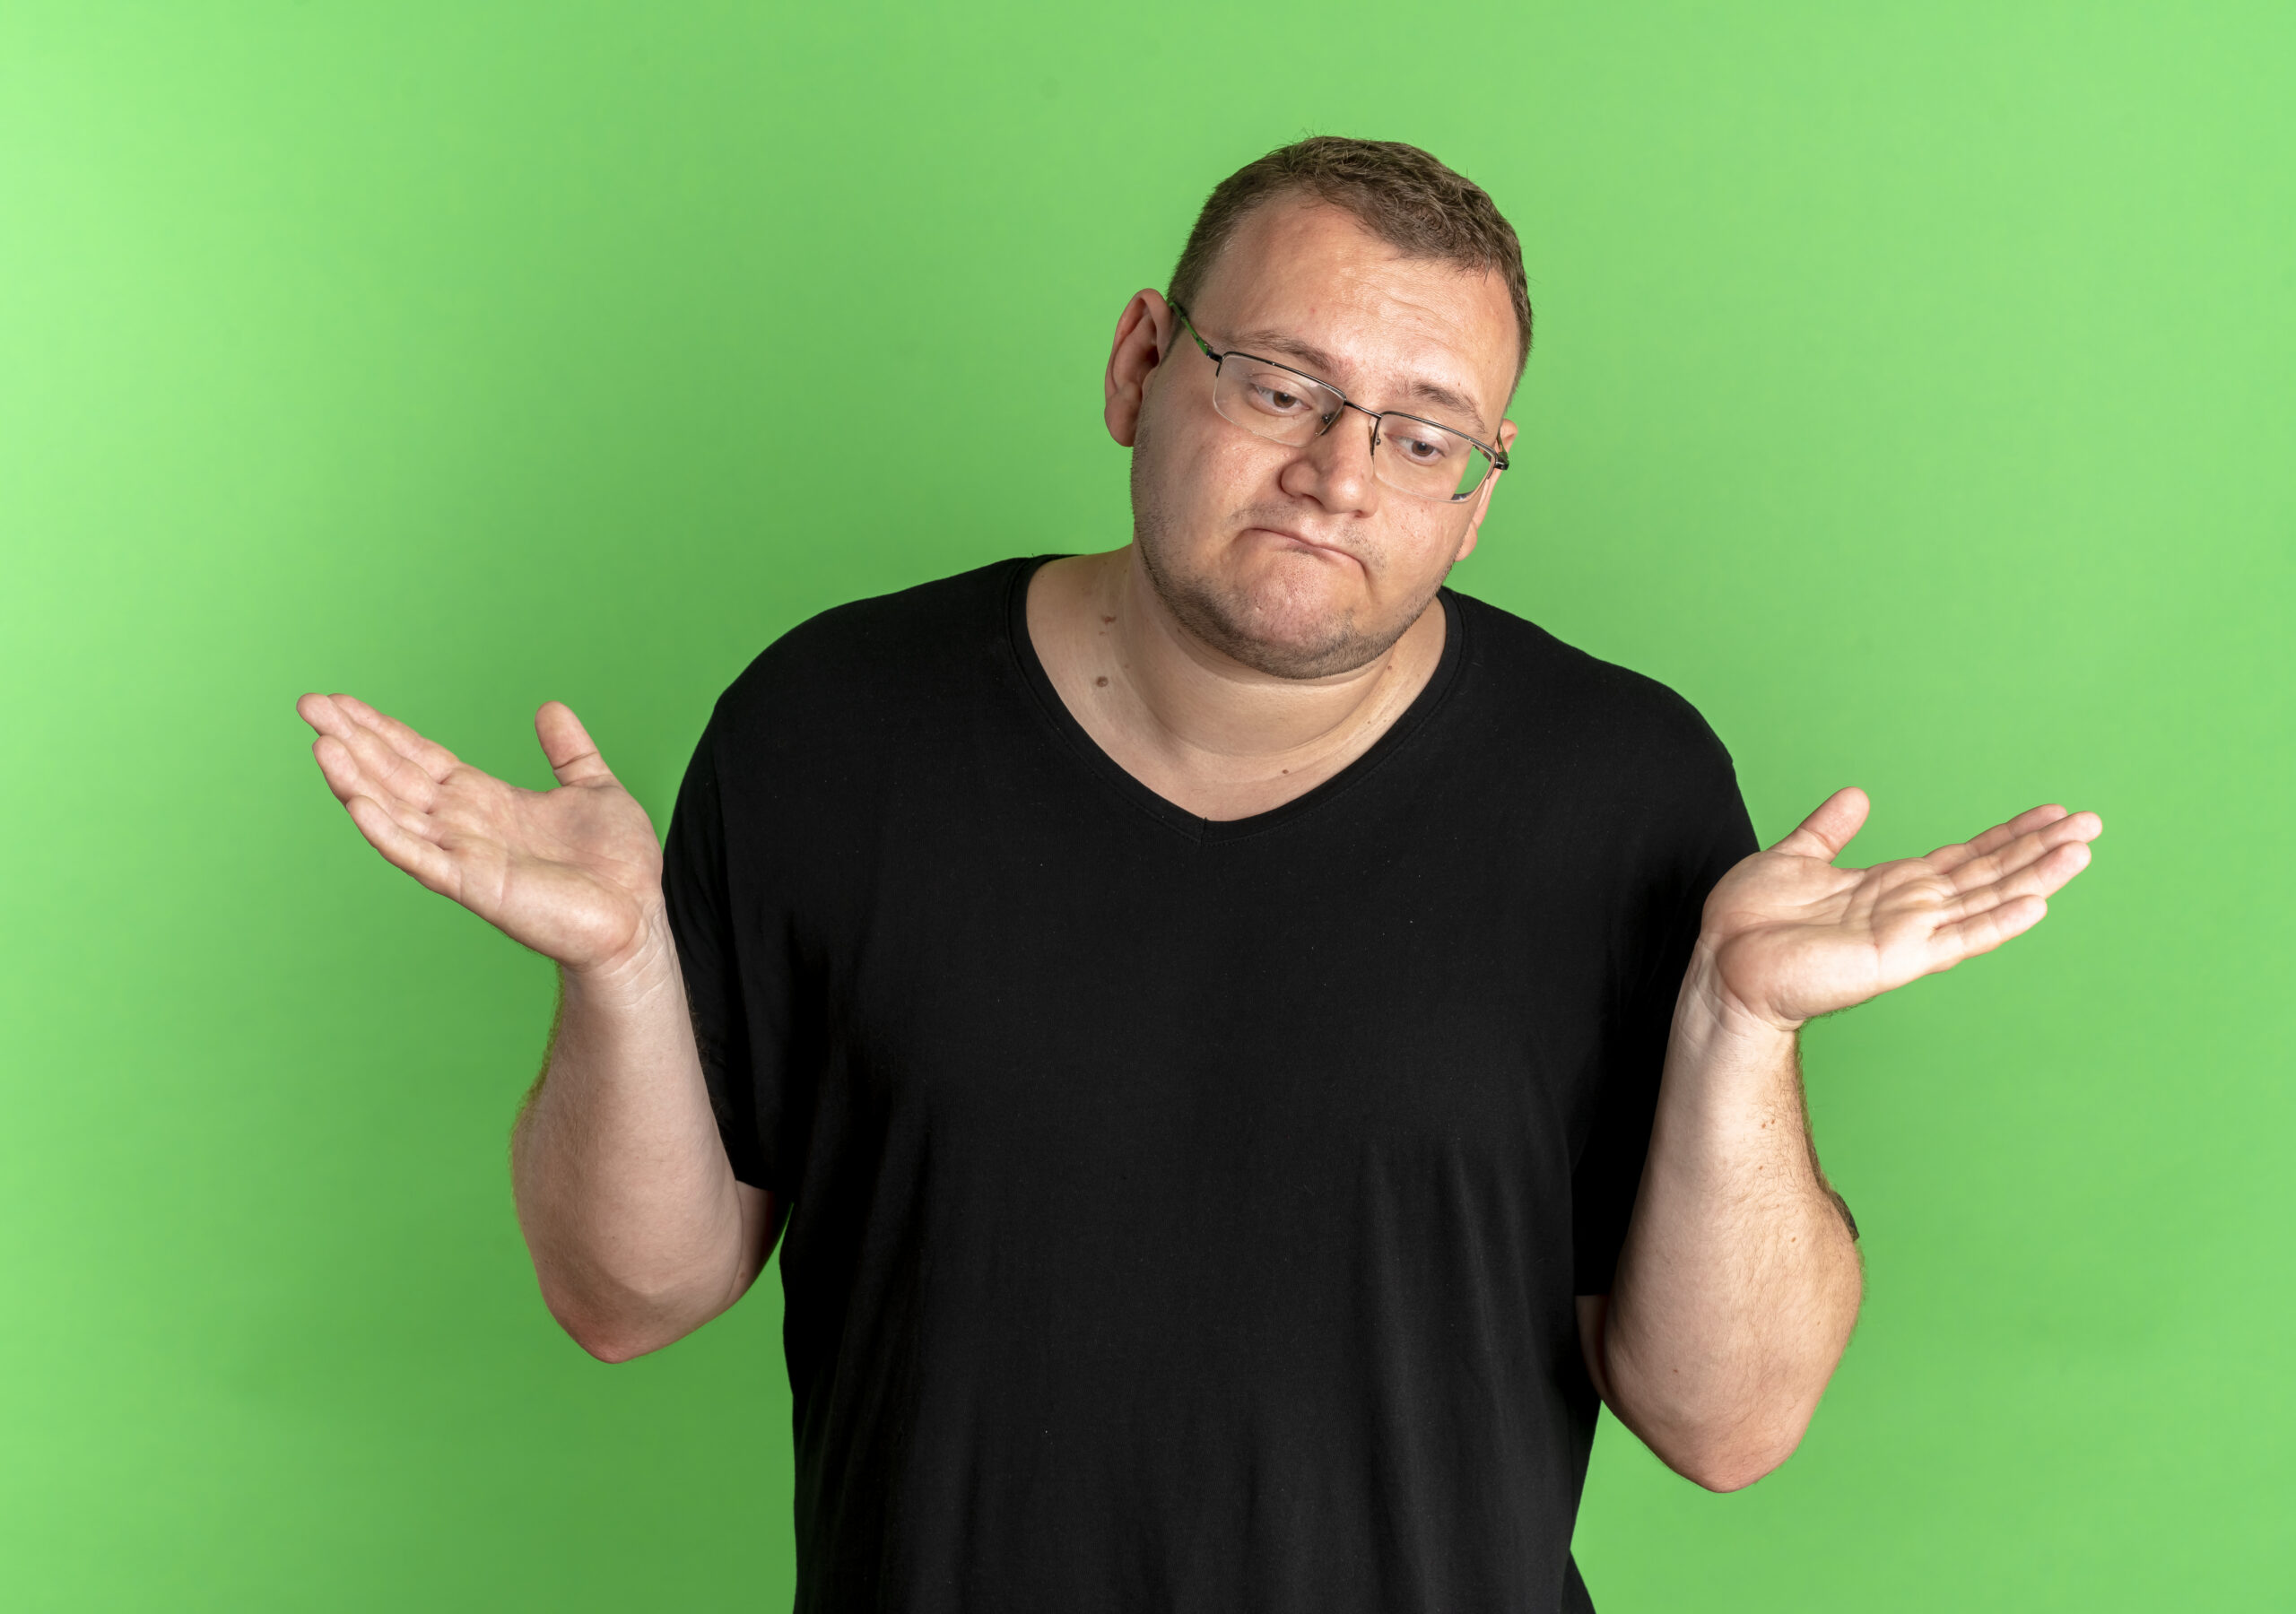 overweight man in glasses wearing black t-shirt looking confused and uncertain spreading arms to the sides having no answer standing over green background